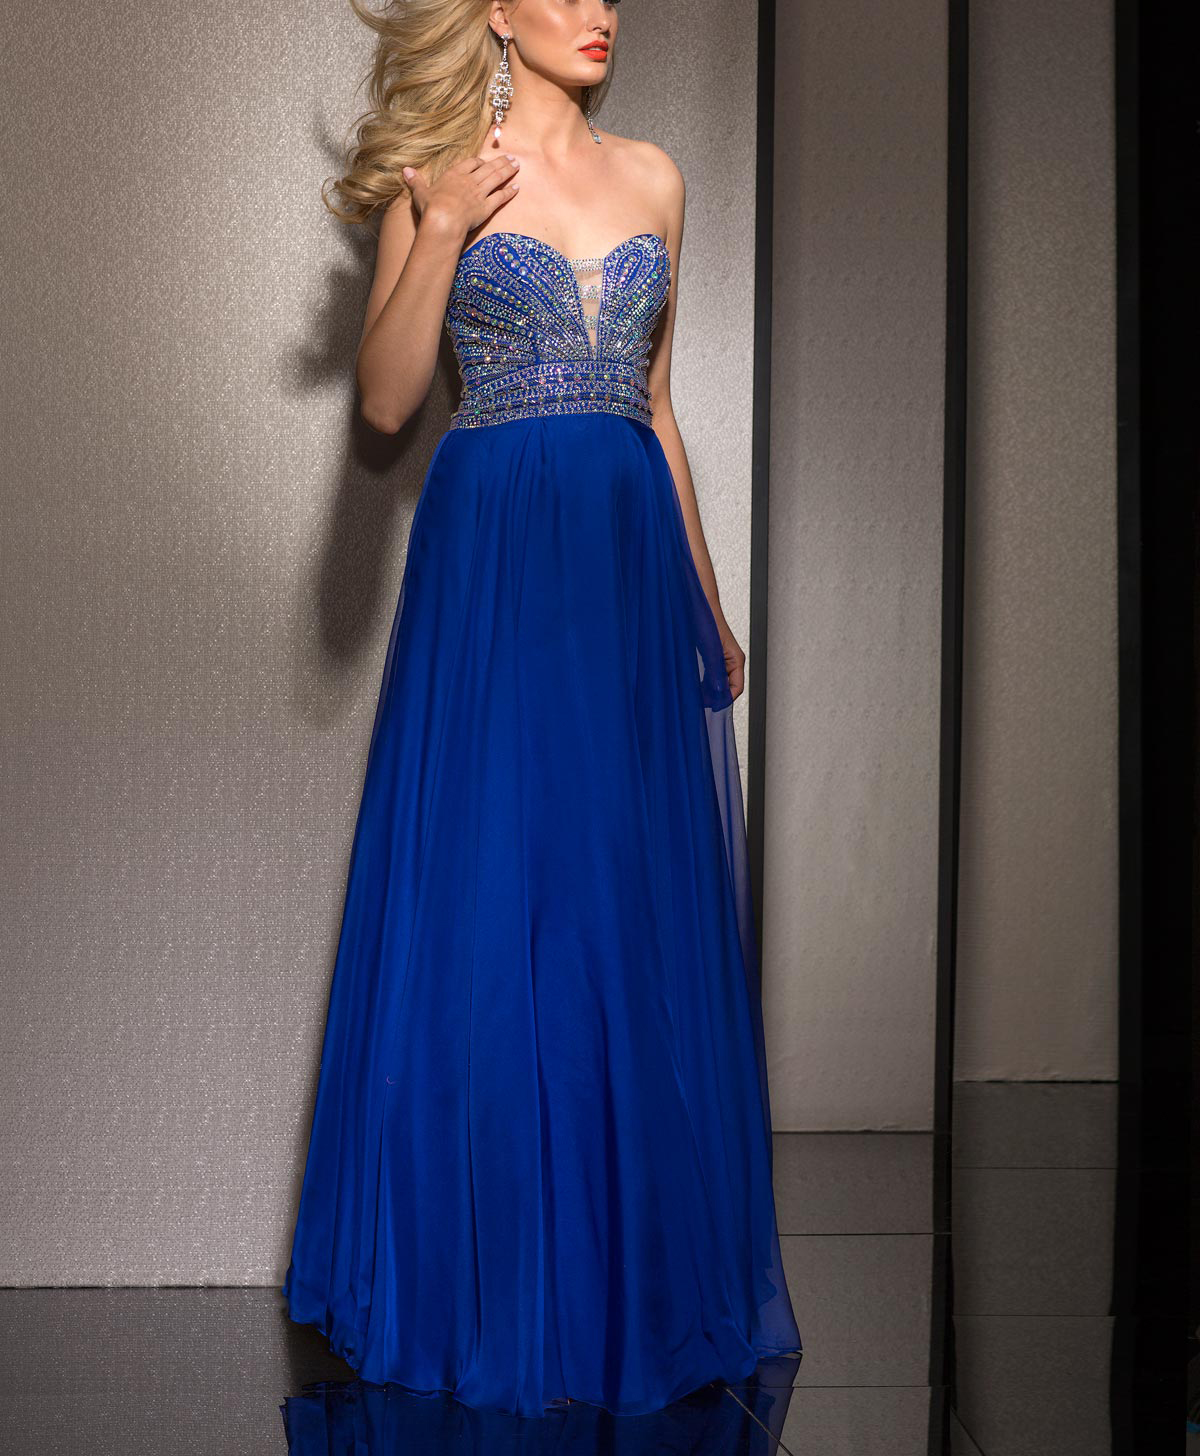 Strapless Junior Prom Dress Long Prom Gowns Royal Blue Beading Chiffon